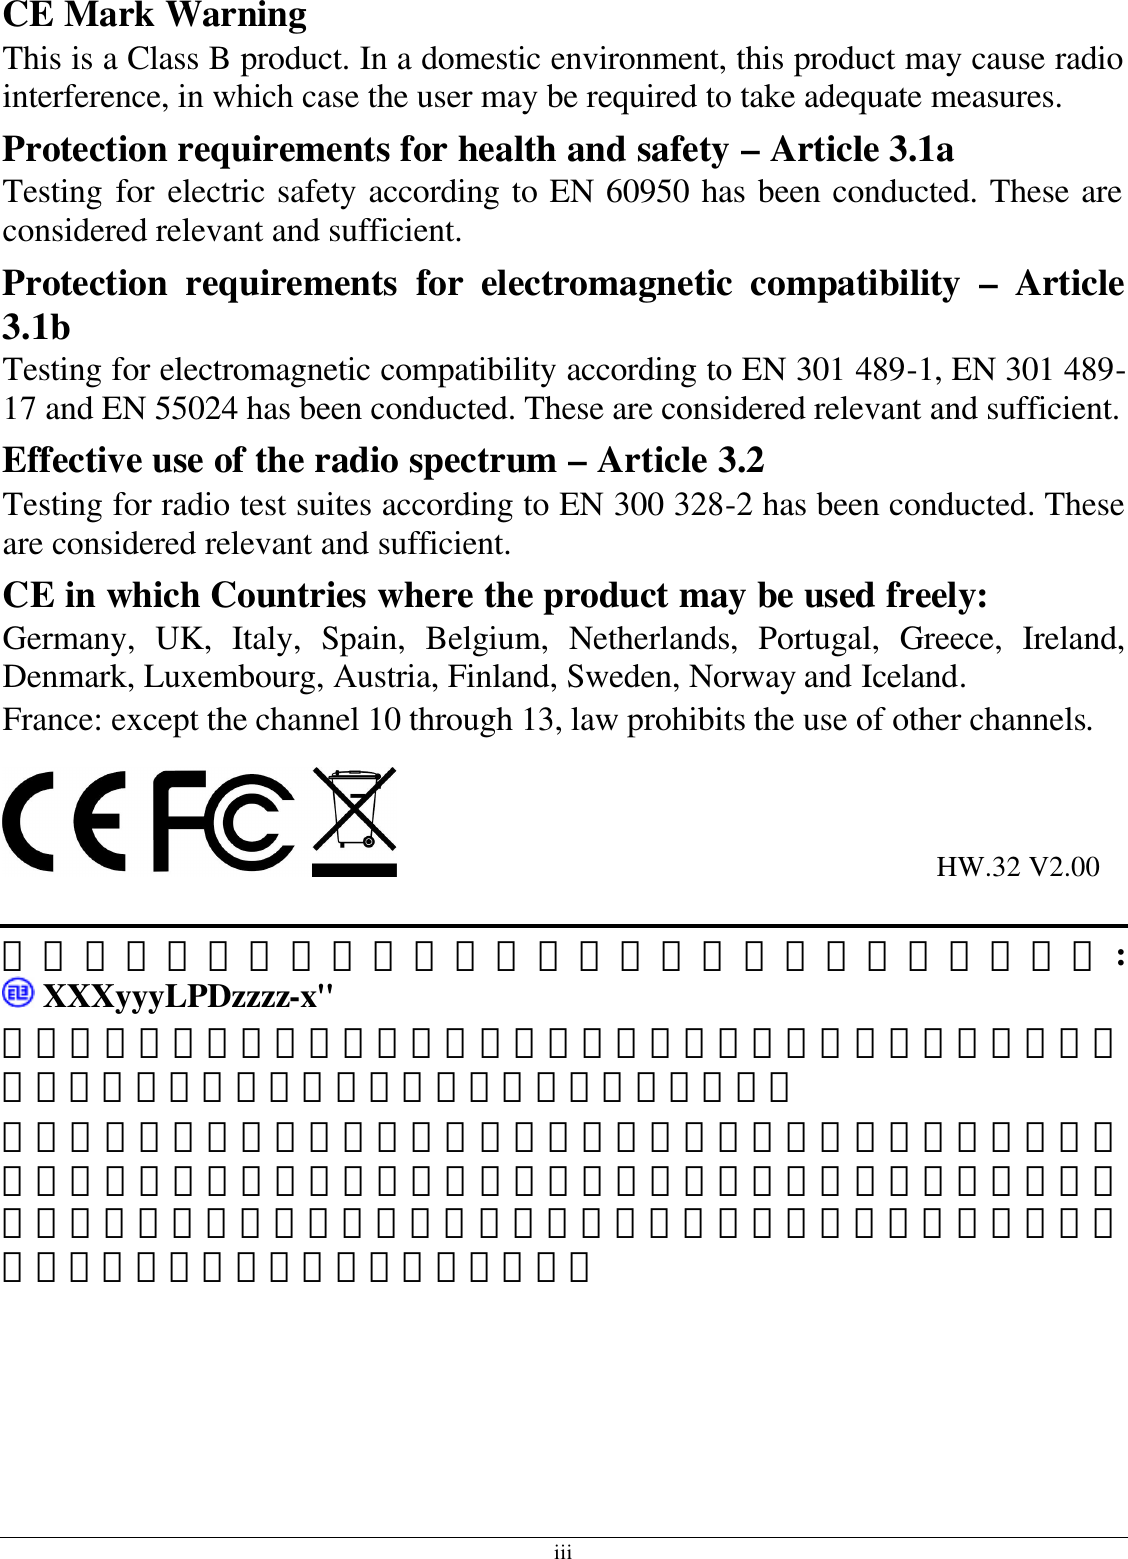 iii CE Mark Warning This is a Class B product. In a domestic environment, this product may cause radio interference, in which case the user may be required to take adequate measures. Protection requirements for health and safety – Article 3.1a Testing for electric safety according to EN 60950 has been conducted. These are considered relevant and sufficient. Protection requirements for electromagnetic compatibility – Article 3.1b Testing for electromagnetic compatibility according to EN 301 489-1, EN 301 489-17 and EN 55024 has been conducted. These are considered relevant and sufficient. Effective use of the radio spectrum – Article 3.2 Testing for radio test suites according to EN 300 328-2 has been conducted. These are considered relevant and sufficient. CE in which Countries where the product may be used freely: Germany, UK, Italy, Spain, Belgium, Netherlands, Portugal, Greece, Ireland, Denmark, Luxembourg, Austria, Finland, Sweden, Norway and Iceland. France: except the channel 10 through 13, law prohibits the use of other channels.                                                                            HW.32 V2.00  使用本產品之系統製造商請於設備上標示本產品內含射頻模組:  XXXyyyLPDzzzz-x&quot;  經型式認證合格之低功率射頻電機，非經許可，公司、商號或使用者均不得擅自變更頻率、加大功率或變更原設計之特性及功能。  低功率射頻電機之使用不得影響飛航安全及干擾合法通信；經發現有干擾現象時，應立即停用，並改善至無干擾時方得繼續使用。前項合法通信，指依電信法規定作業之無線電通信。低功率射頻電機須忍受合法通信或工業、科學及醫療用電波輻射性電機設備之干擾。   